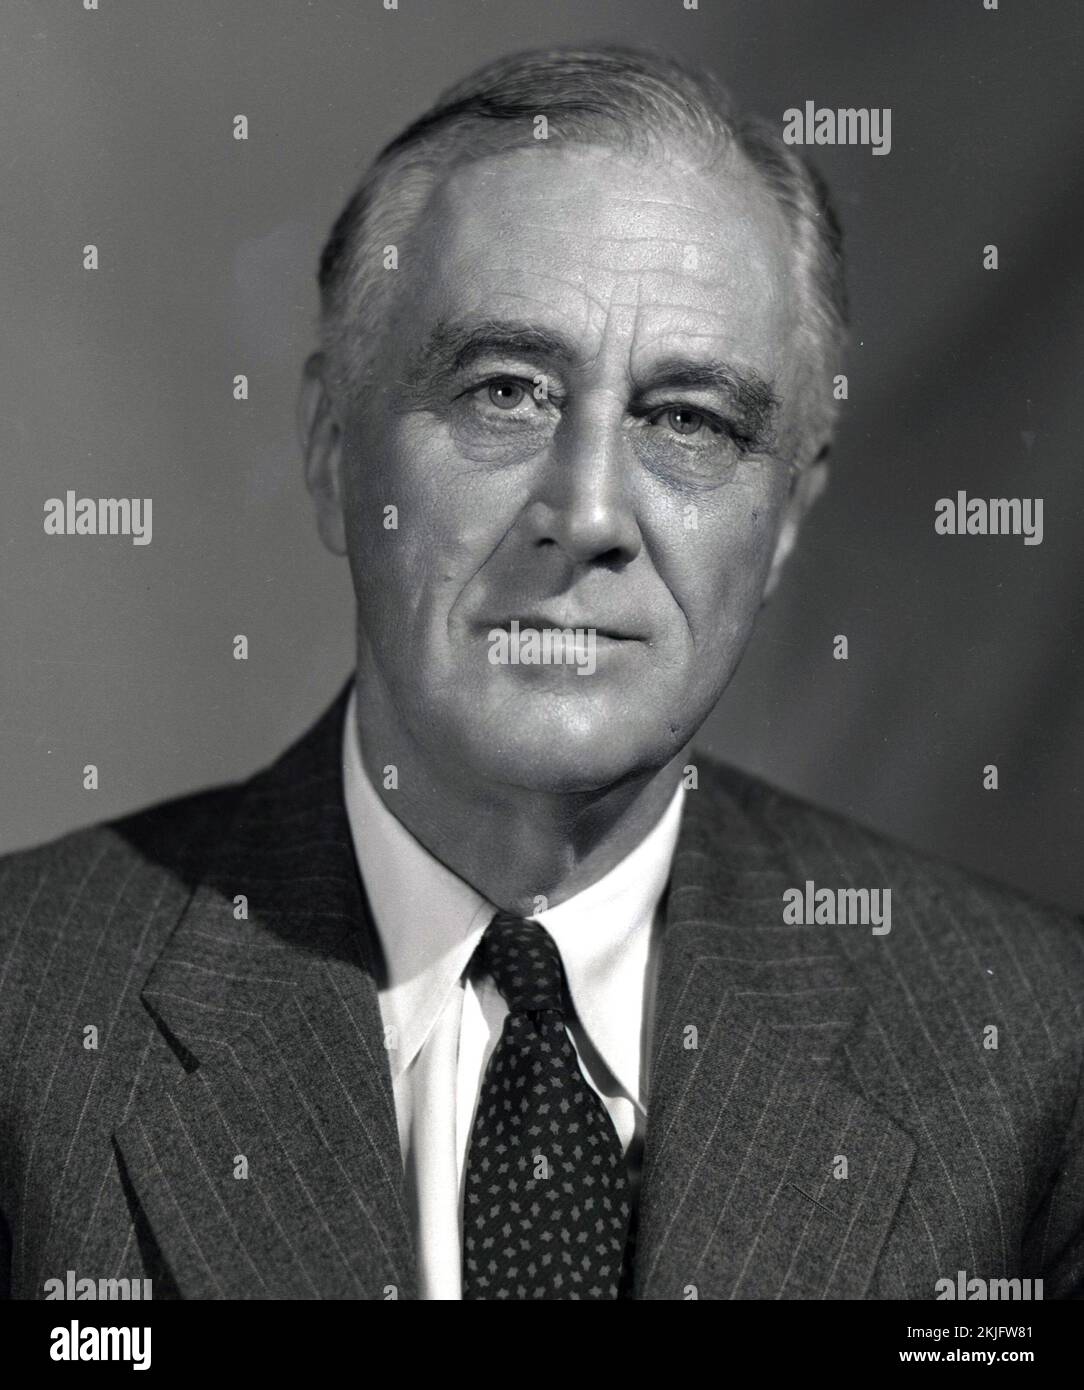 A 1944 portrait of US President Franklin D Roosevelt.  He was 62 yrs old. Photo credit By FDR Presidential Library &amp; Museum - 09-109(12), CC BY 2.0, https://commons.wikimedia.org/w/index.php?curid=40021191 Stock Photo